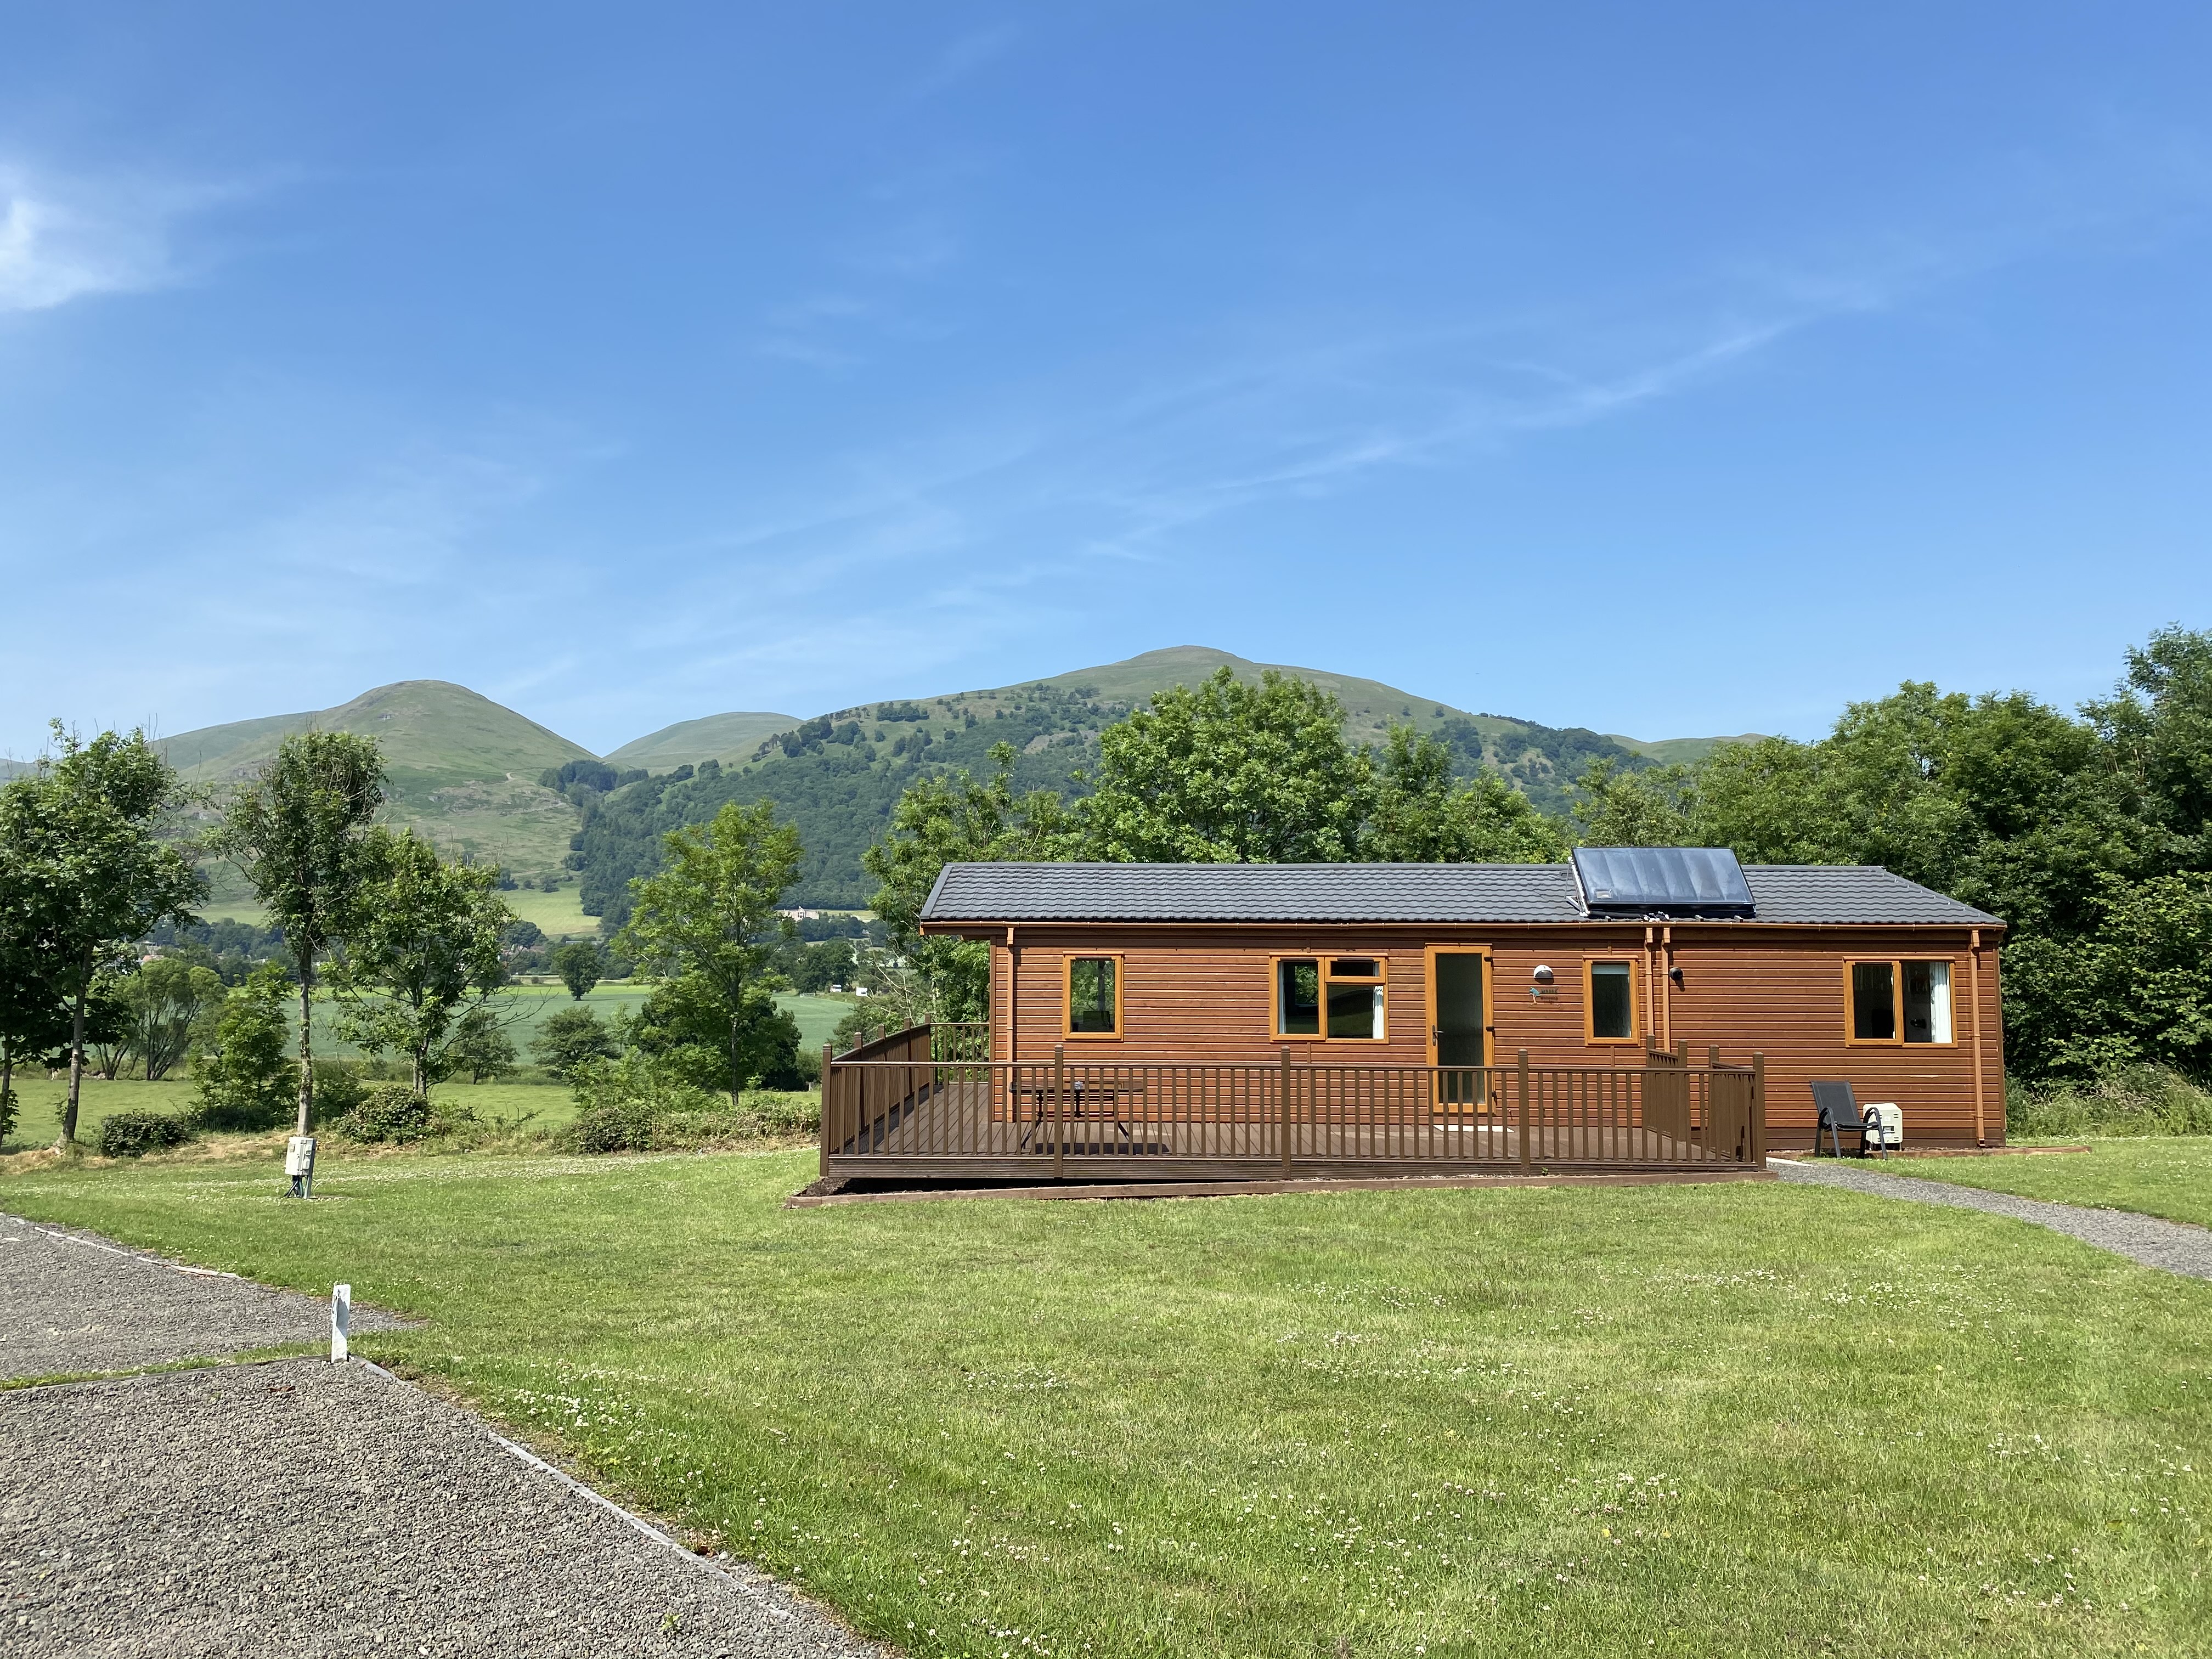 Self-catering Lodges for hire